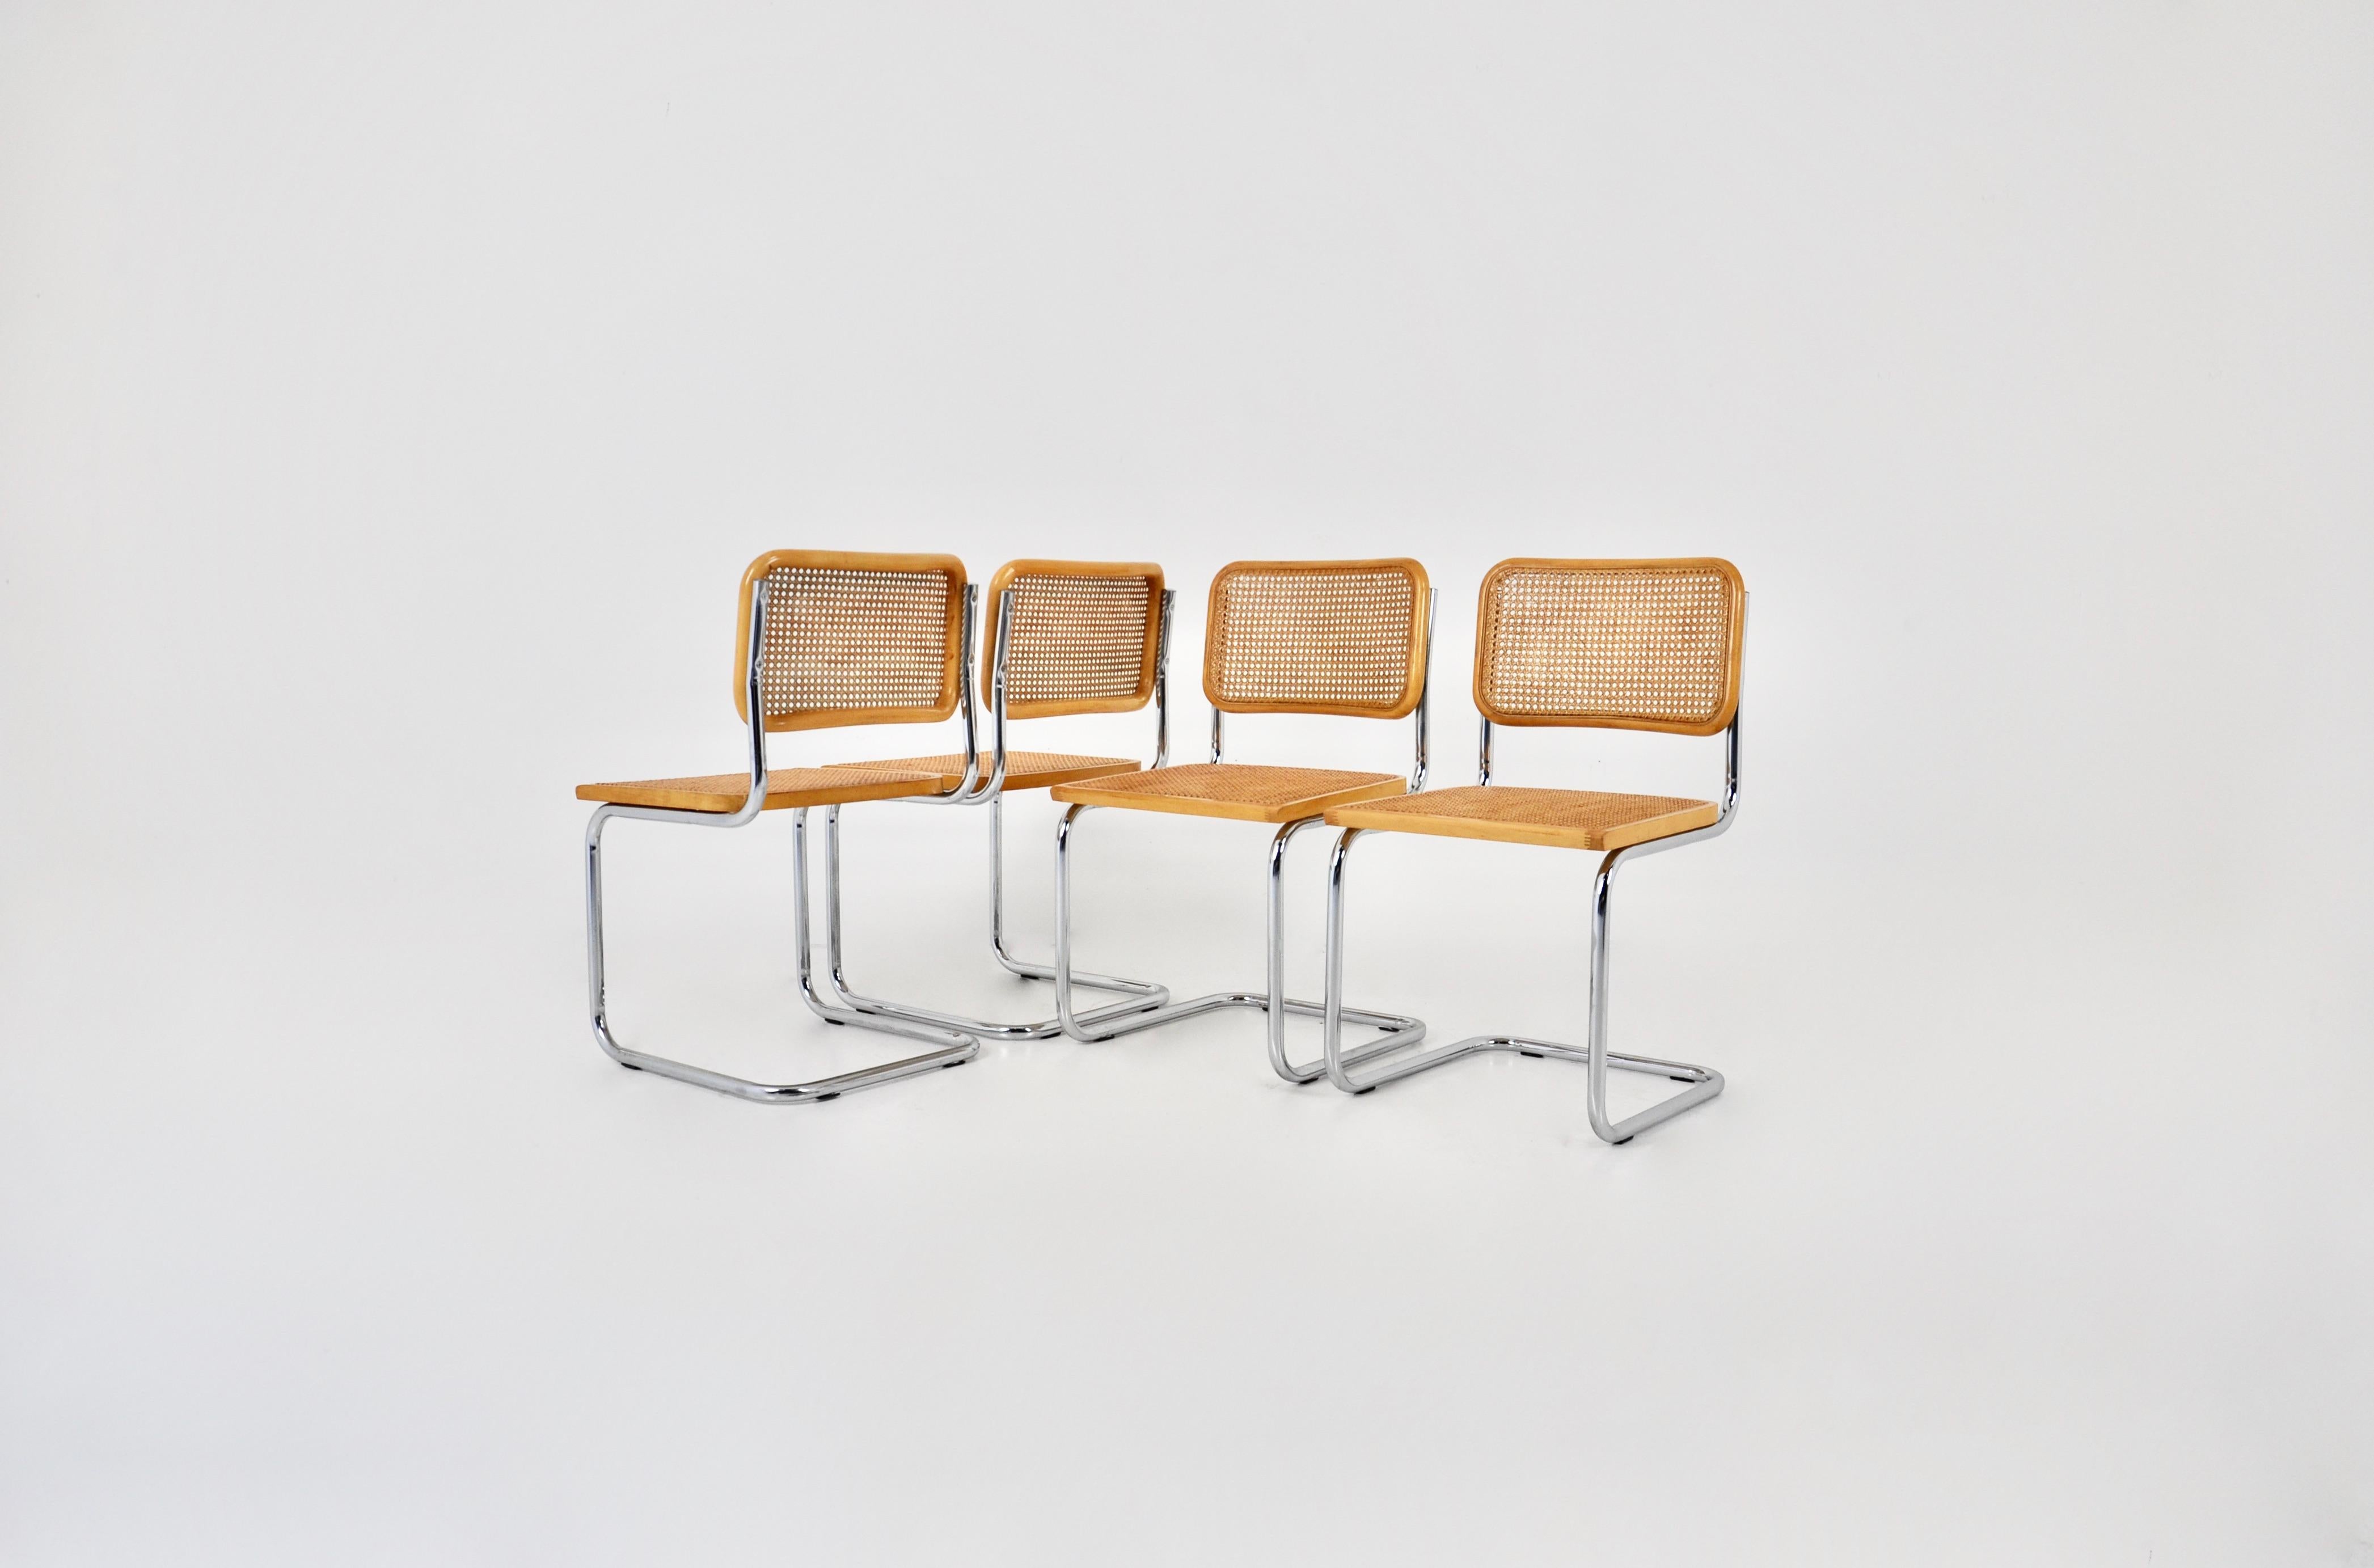 Set of 4 chairs in metal, wood and cane. Wear due to time and age of the chairs.
Measure: Seat height: 45cm.